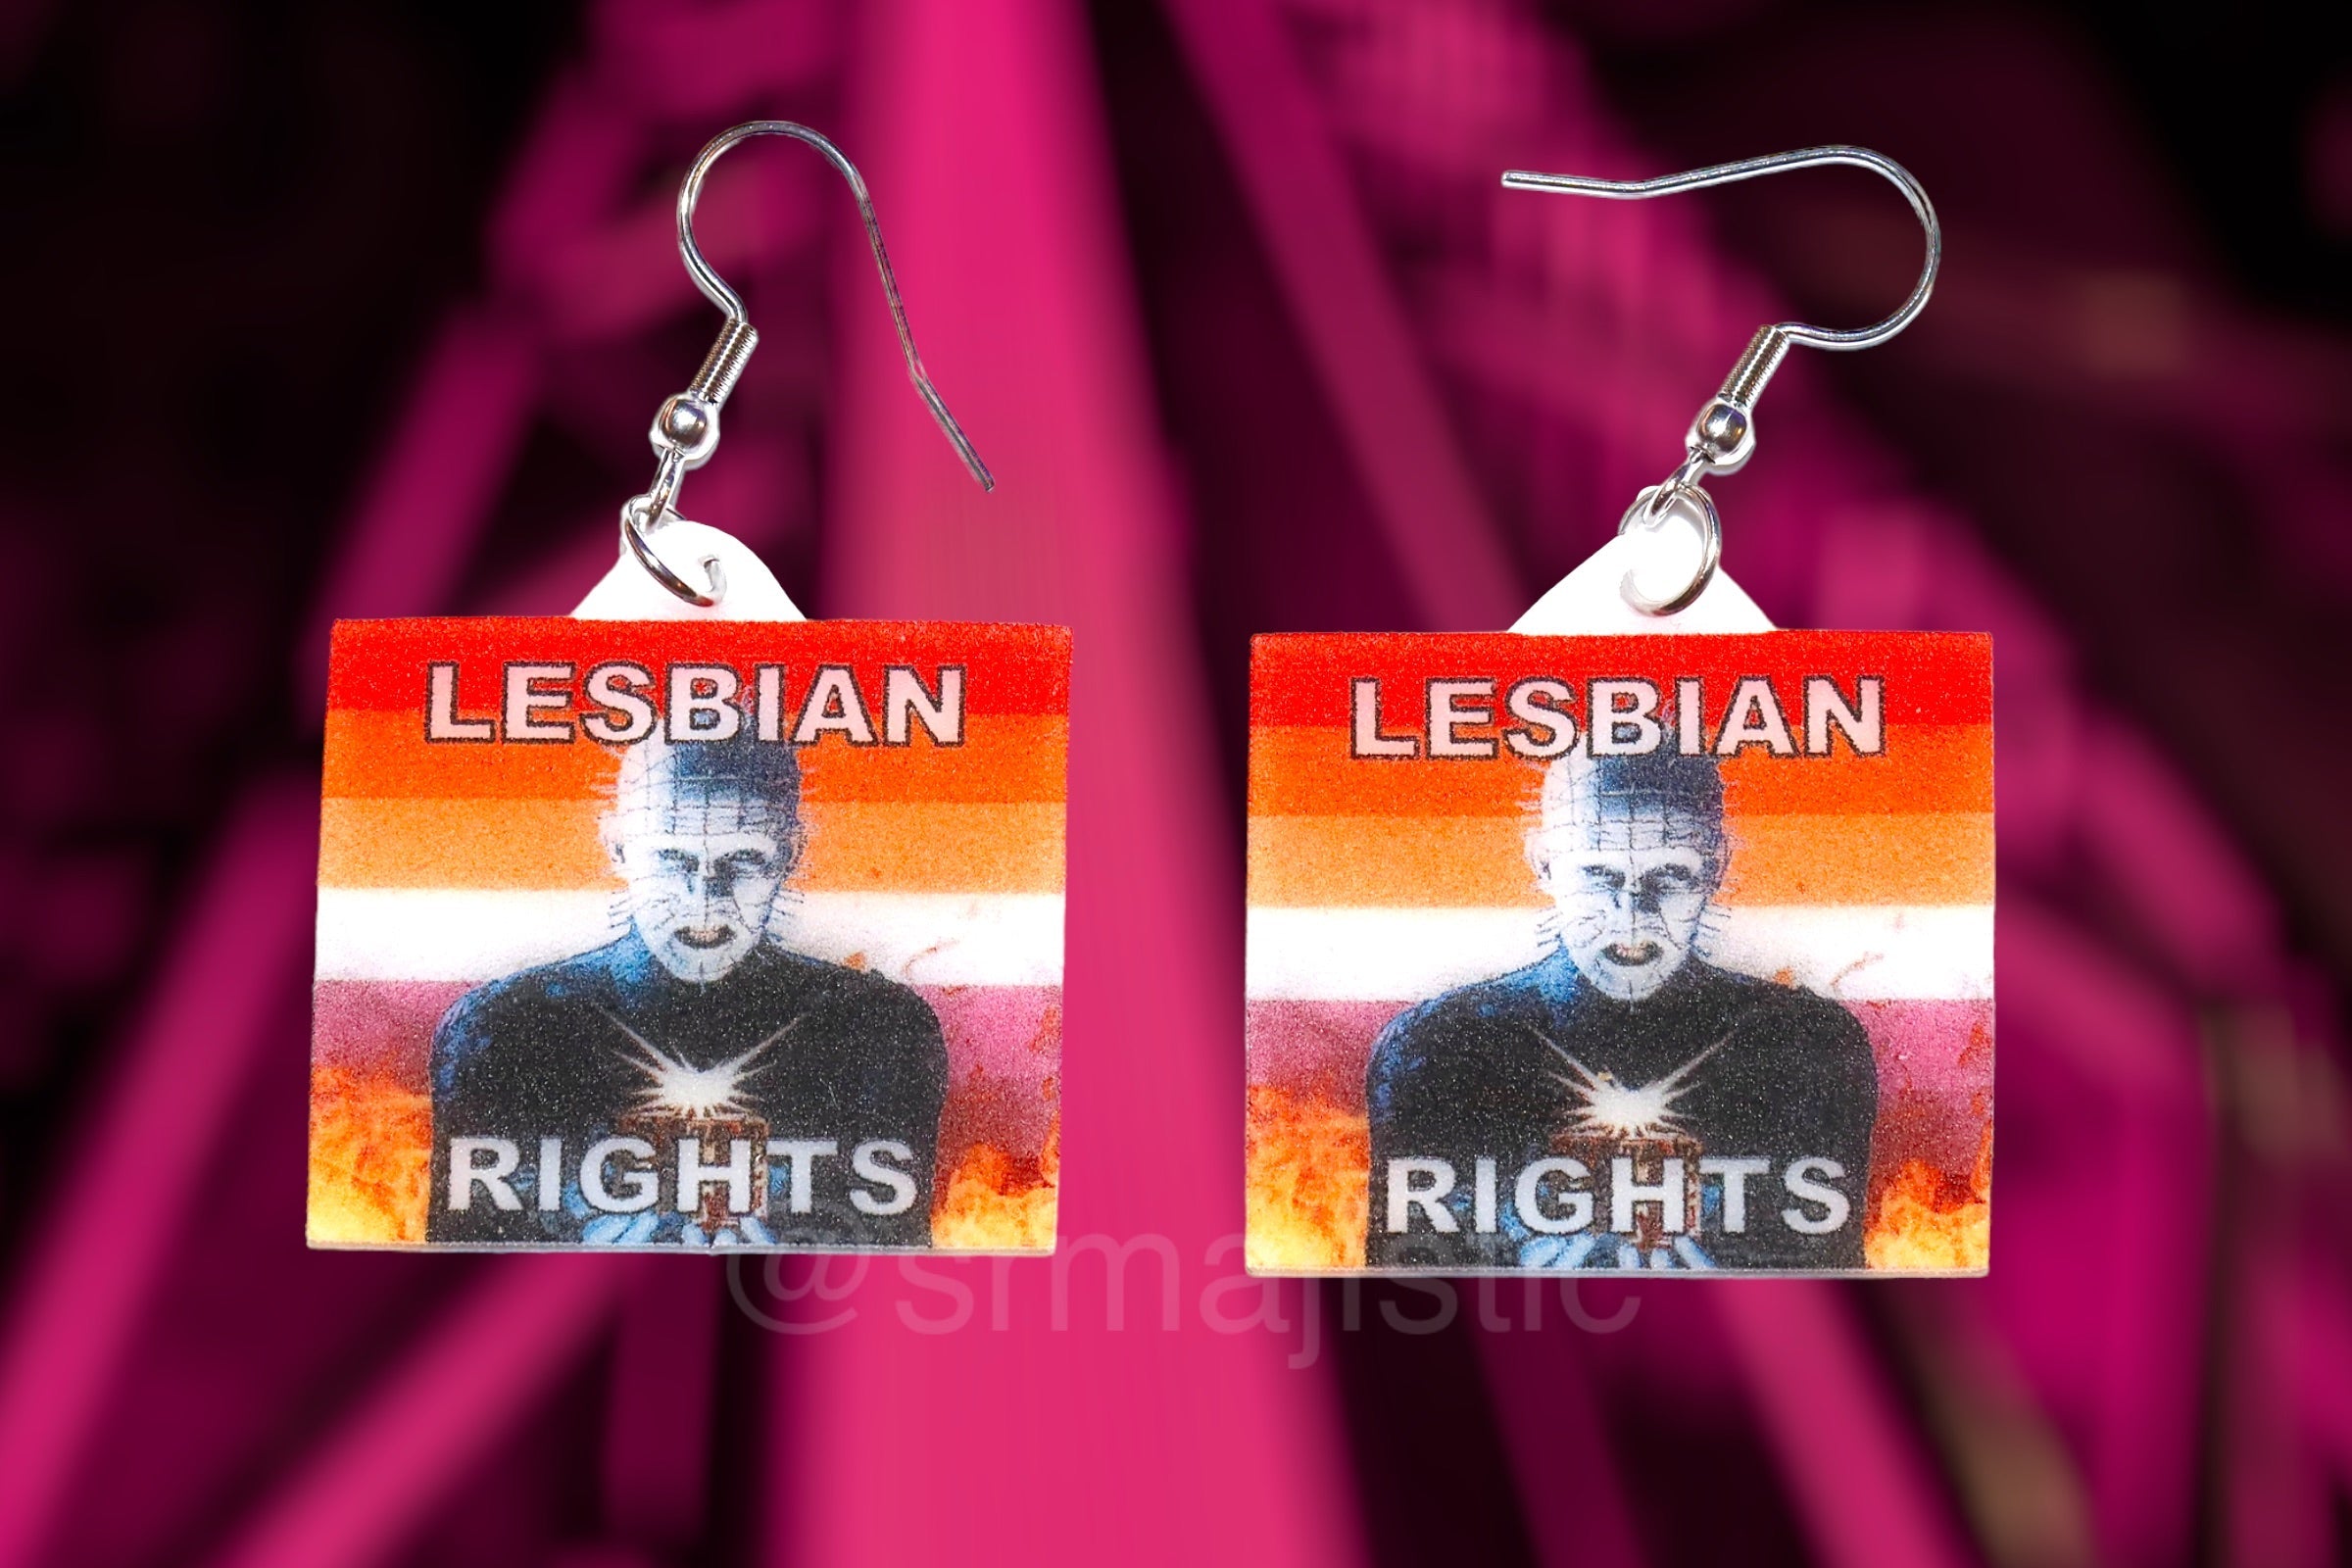 (READY TO SHIP) Hellraiser Pinhead Collection of Flaming Pride Flags Handmade Earrings!